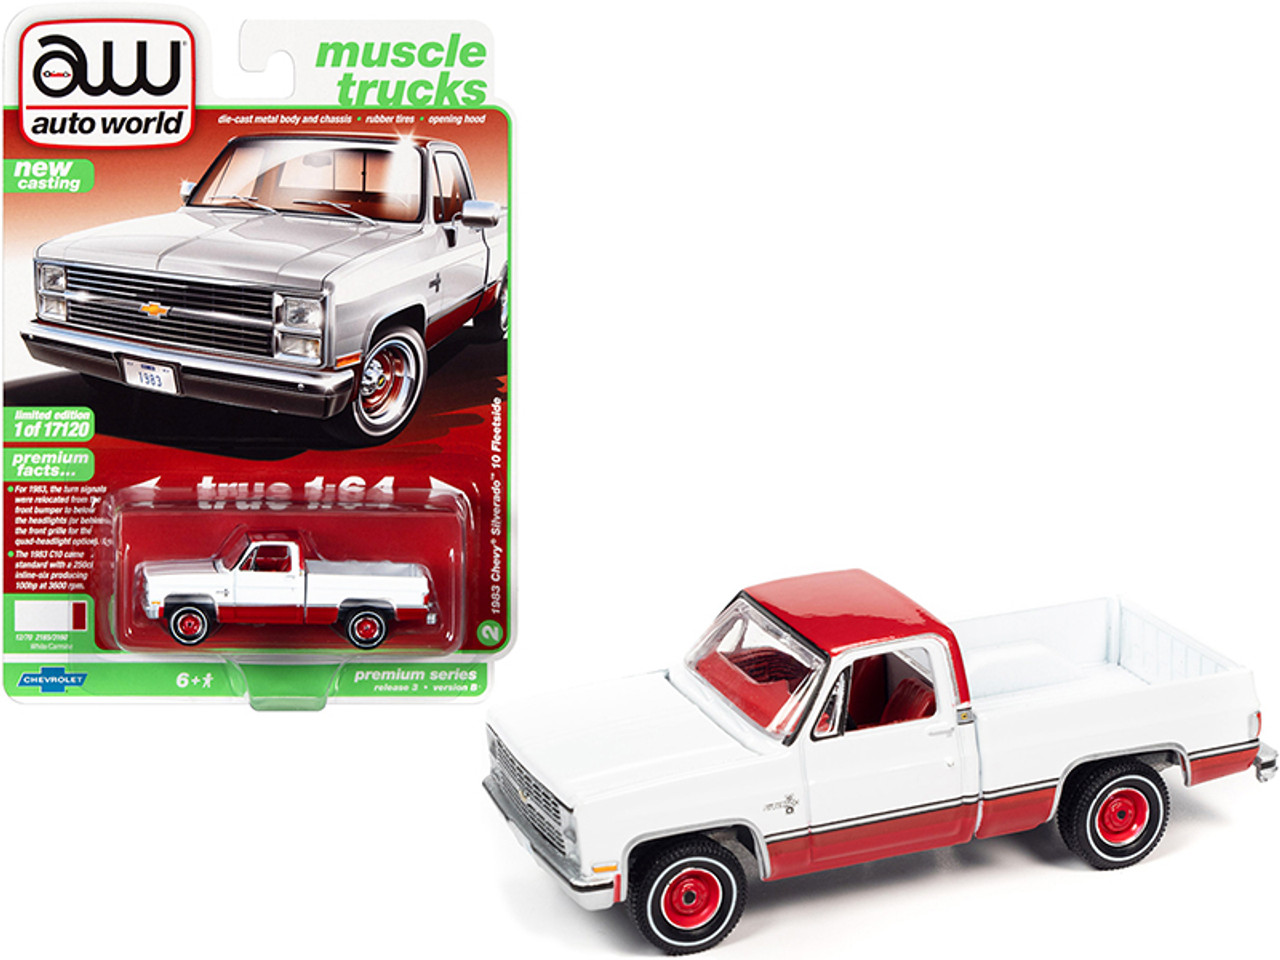 1983 Chevrolet Silverado 10 Fleetside Pickup Truck White and Carmine Red with Red Interior "Muscle Trucks" Limited Edition to 17120 pieces Worldwide 1/64 Diecast Model Car by Autoworld